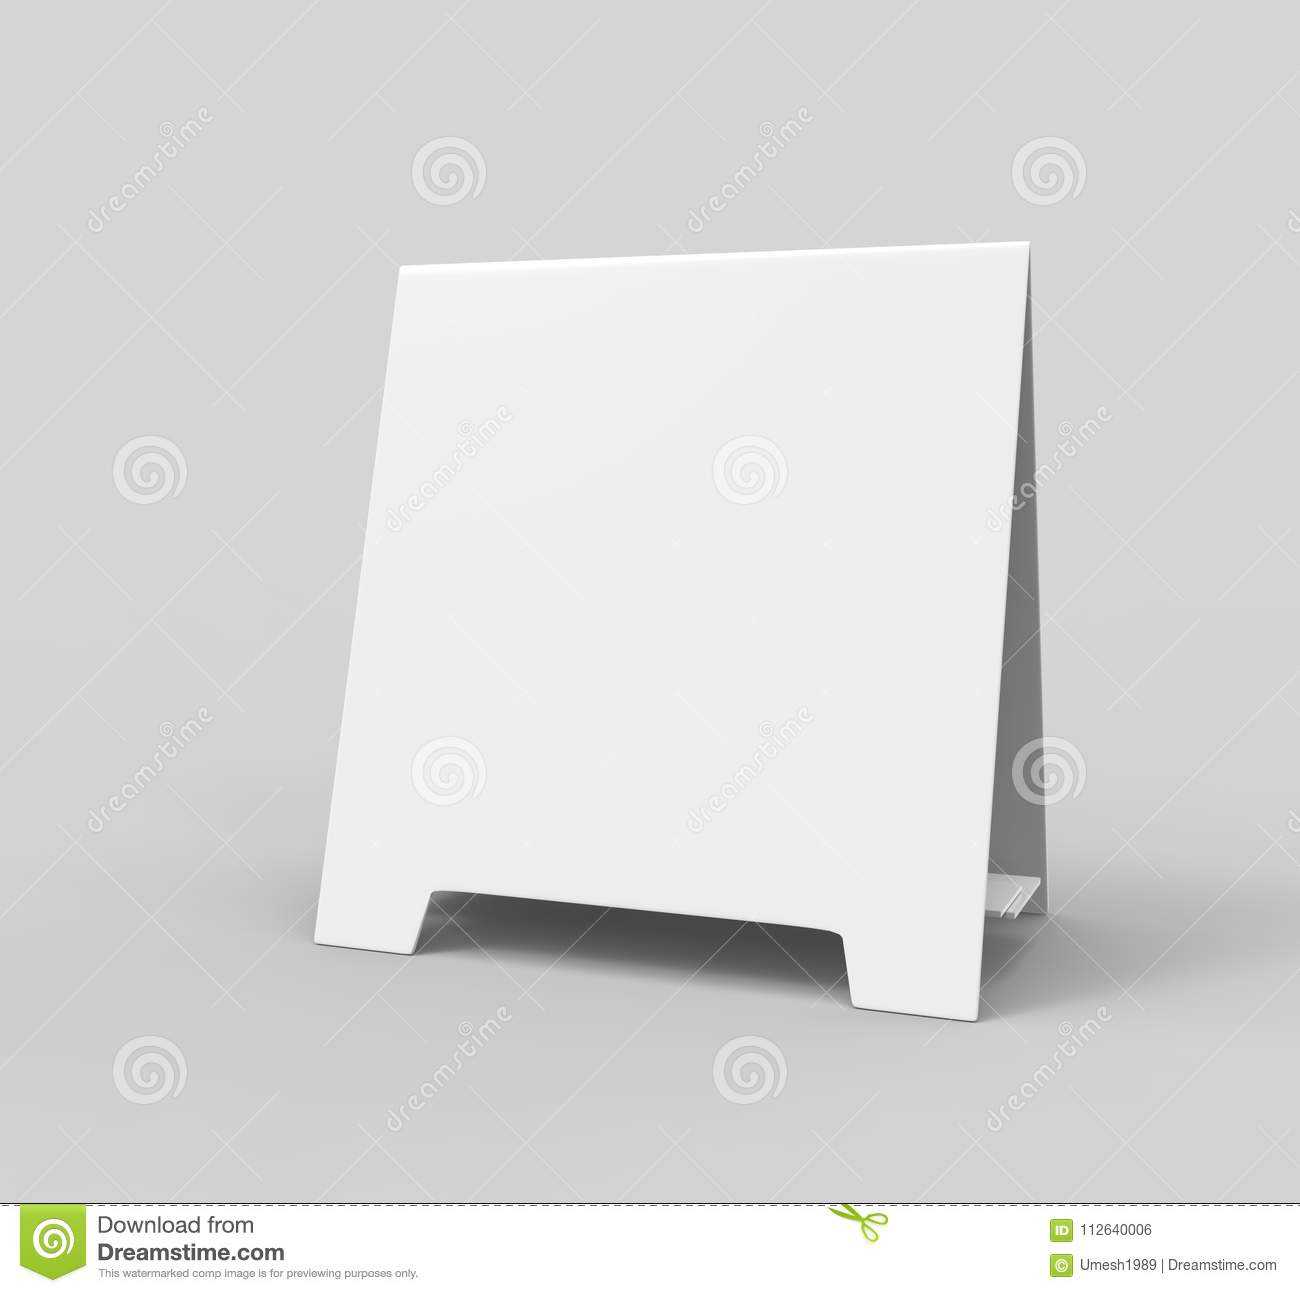 Tablet Tent Card Talkers Promotional Menu Card White Blank With Regard To Blank Tent Card Template